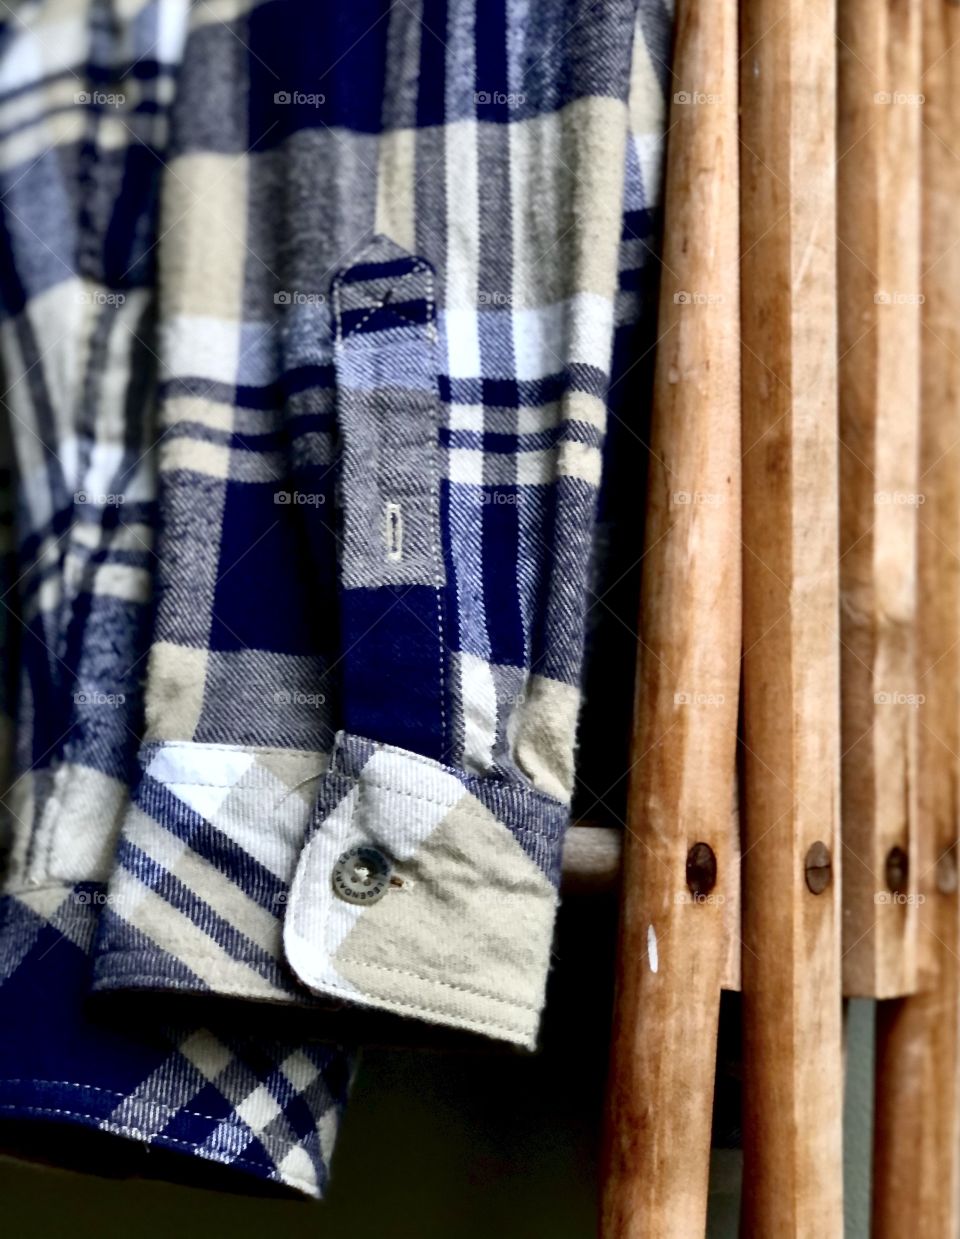 Men’s plaid flannel shirt folded over wooden clothes rack in soft light